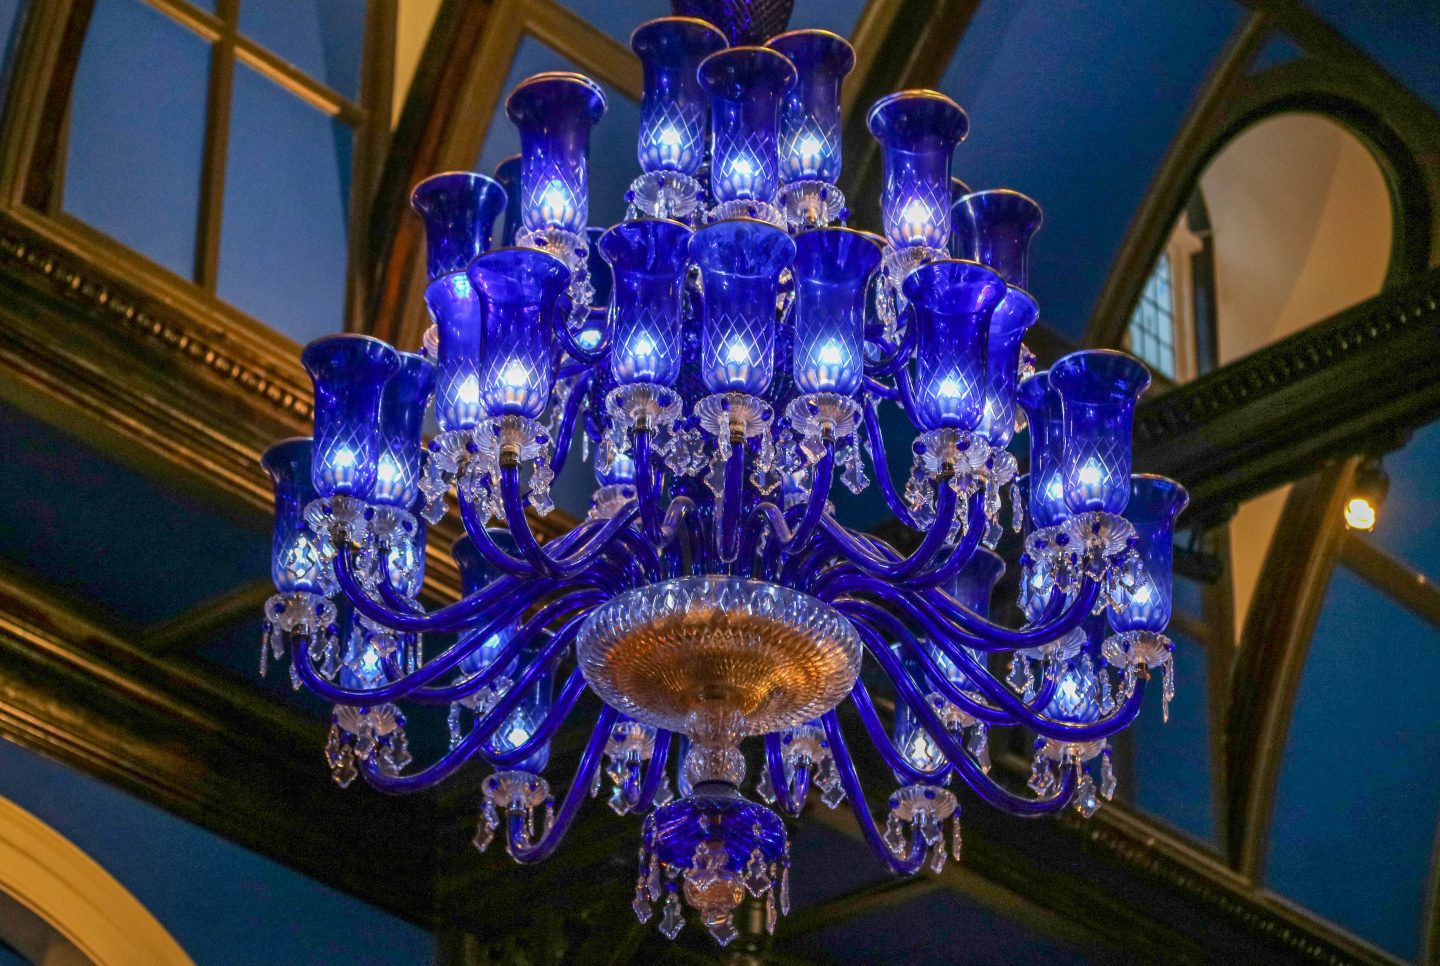 The LaLiT Hotel London - Baluchi Great Hall - Blue Chandelier - Lifestyle Enthusiast Blog Review